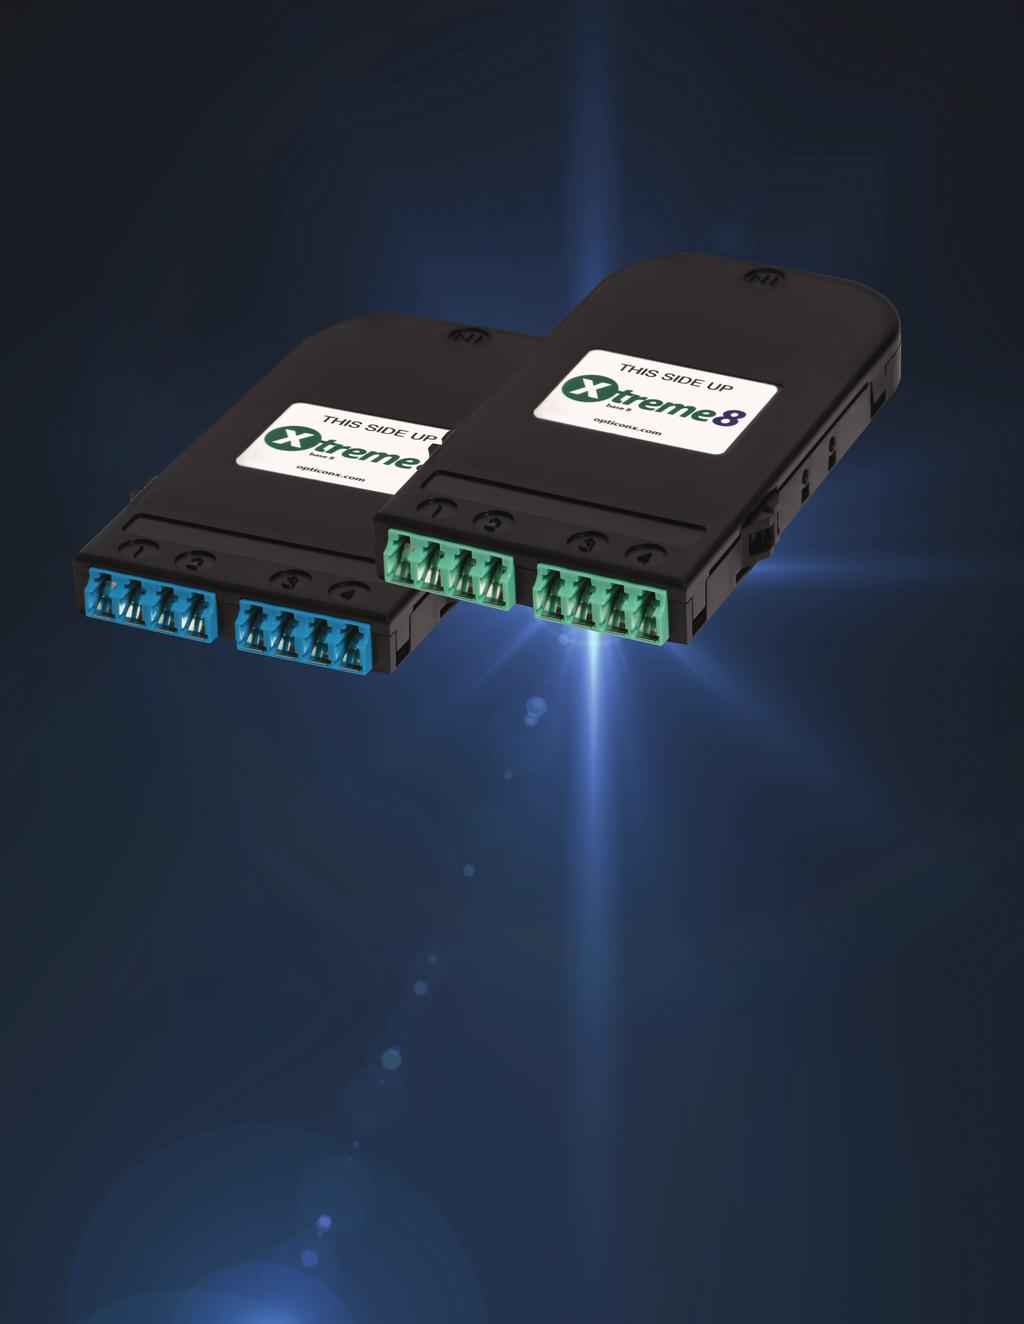 Solutions Solutions FOR DATA CENTERS AND STORAGE AREA NETWORKS Xtreme8 is Opticonx s Base-8 cabling solution for easy migration of 10/40/100 and 400G parallel optics deployments in the data center.